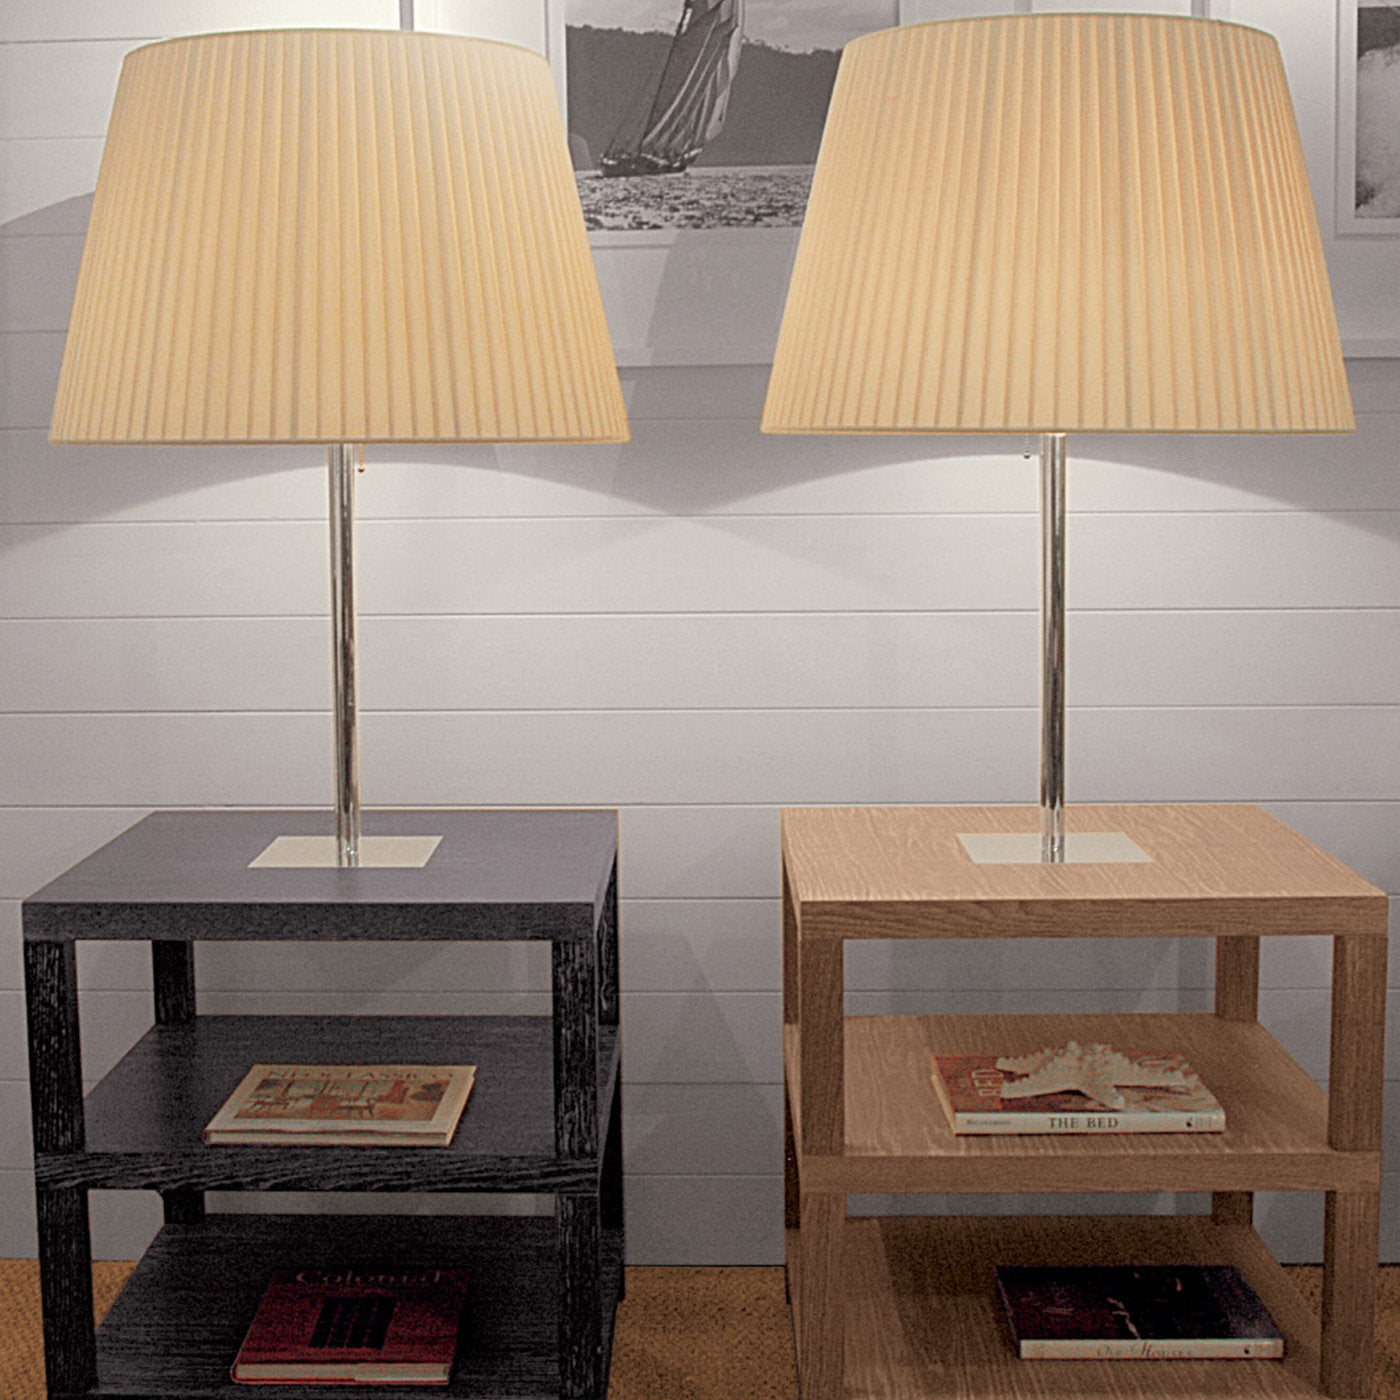 Bedside Table with Lamp by Michele Bonan - Alternative view 1